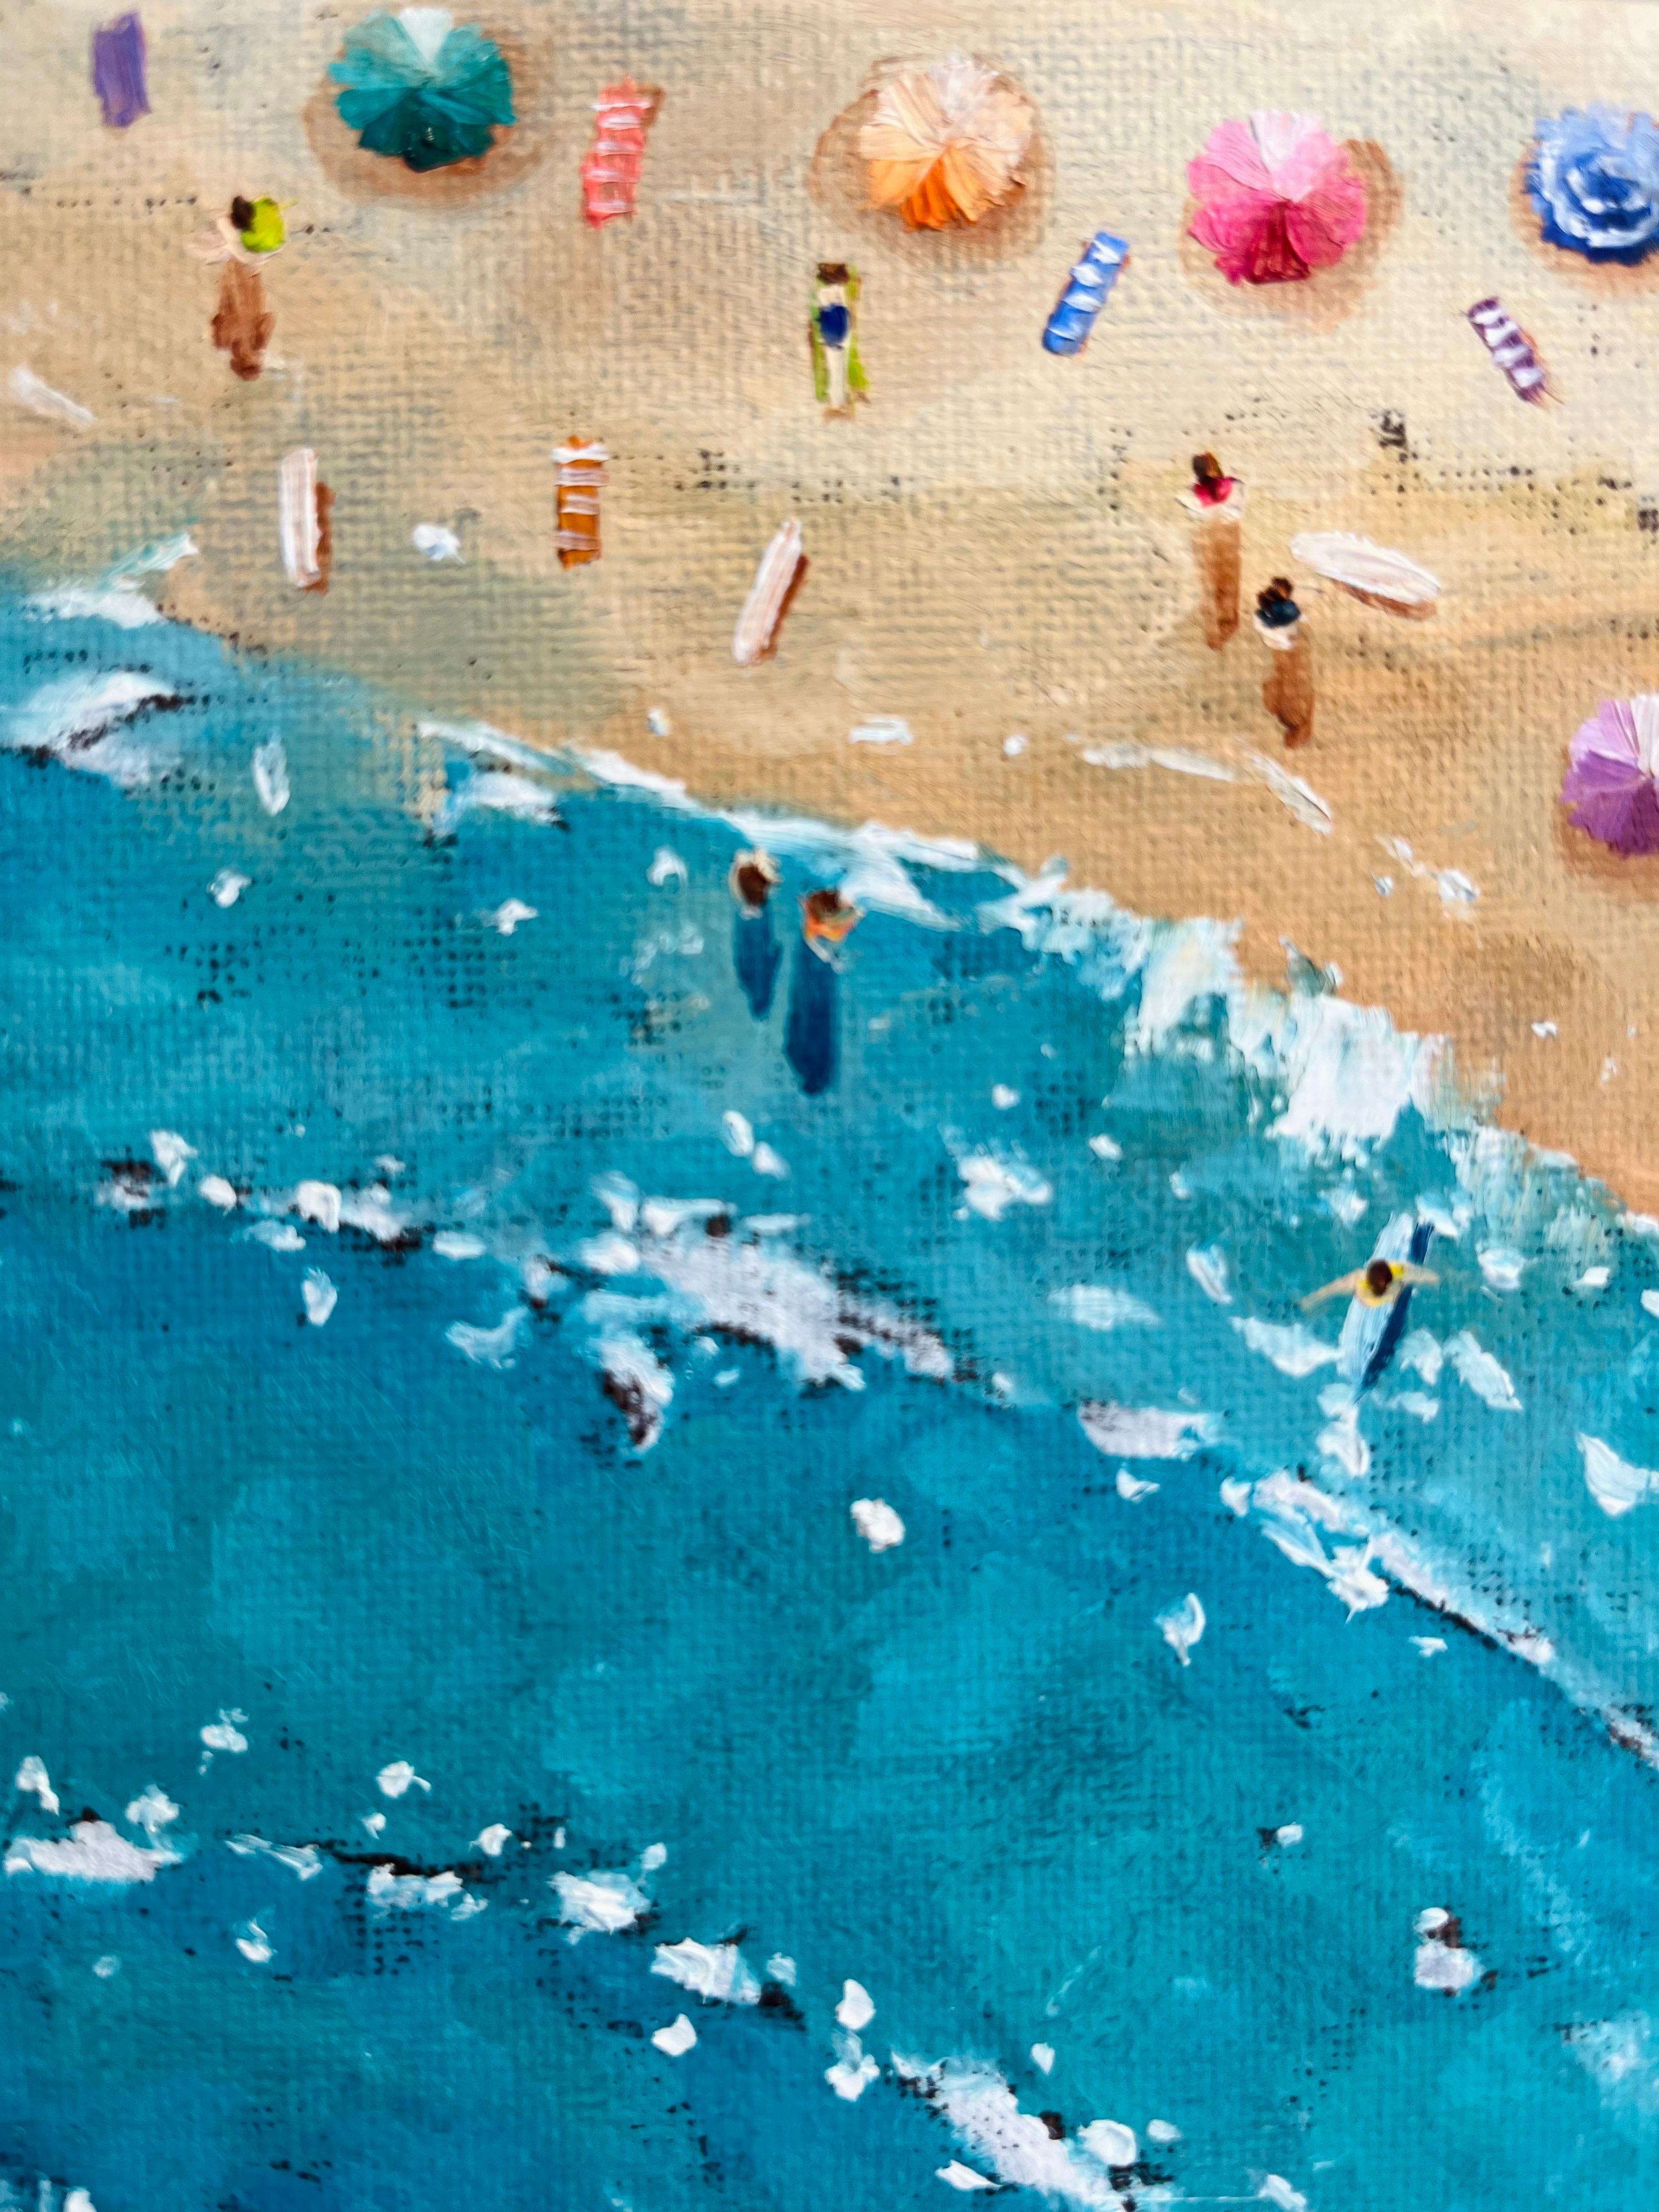 Cornish landscape artist Lenny Cornforth imparts a positive and lively rendering of a UK beach scene, depicting the Perranporth shoreline study from a beguiling aerial point of view. This figurative painting is suffused with joyful nostalgia for